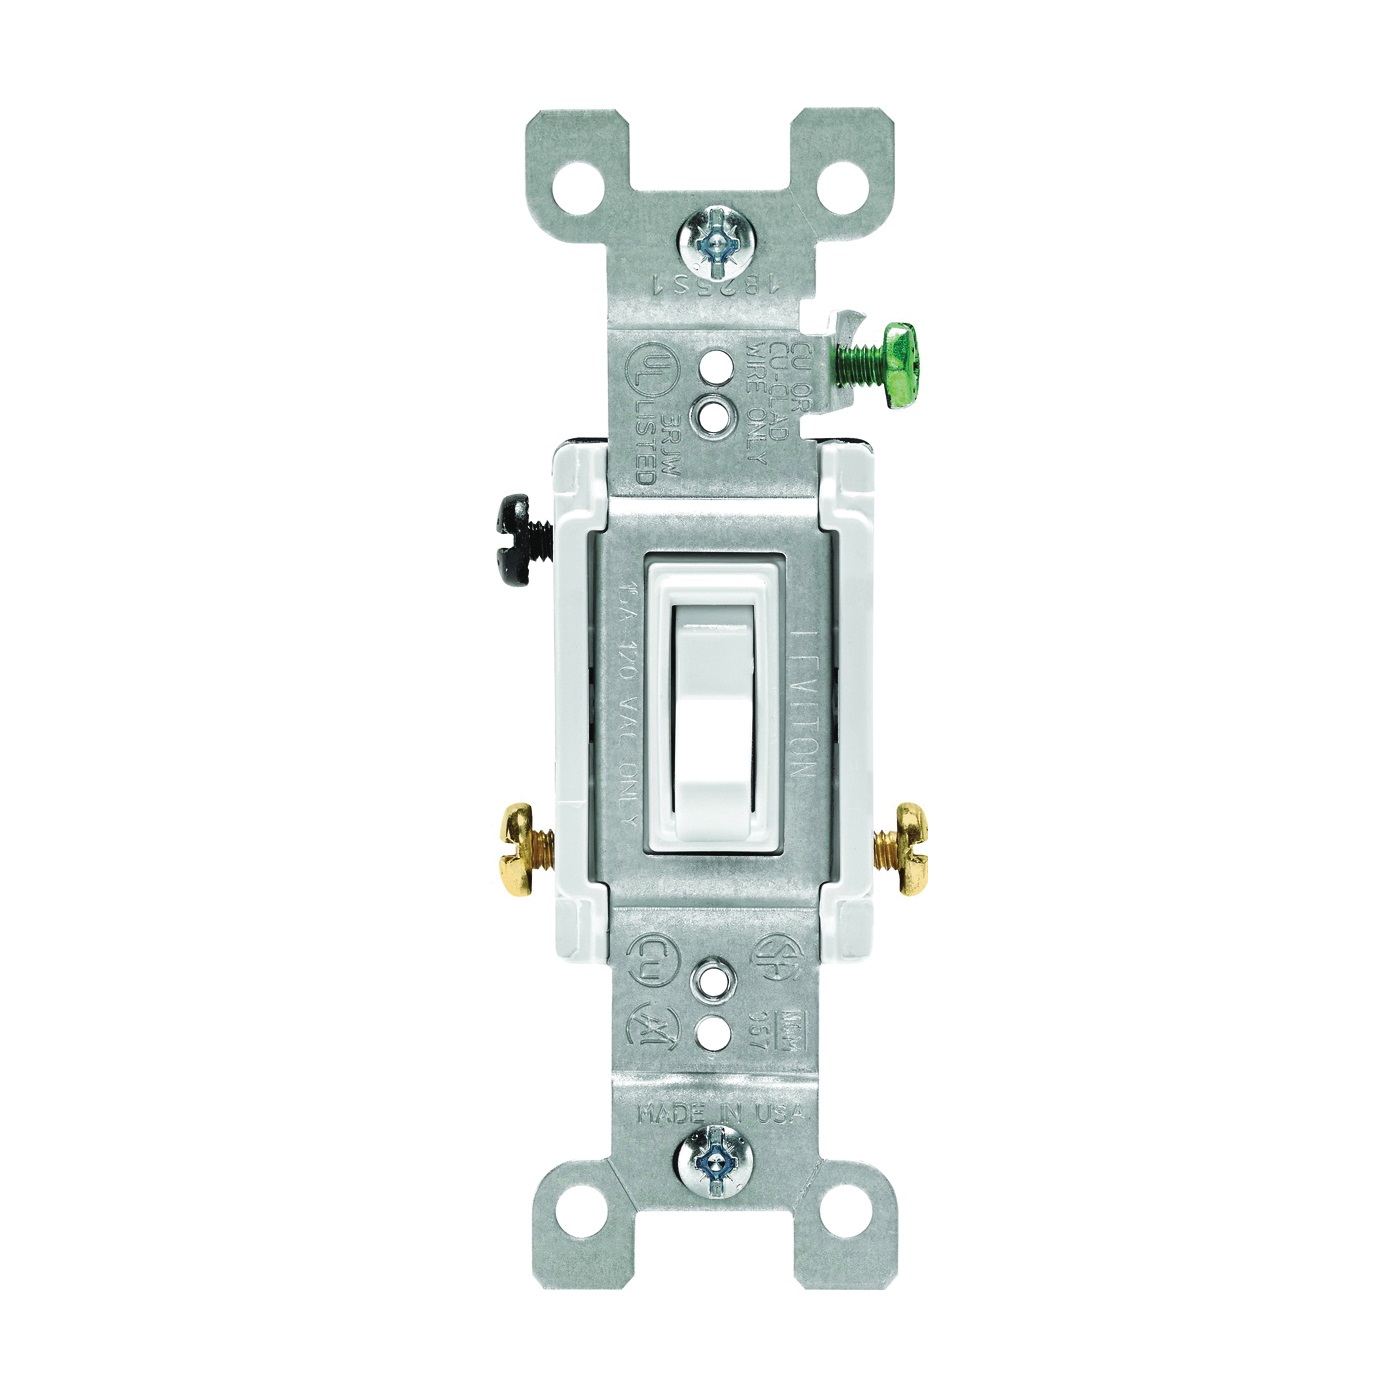 Leviton 1453-2W Switch, 15 A, 120 V, 3-Way, Push-In Terminal, Thermoplastic Housing Material, White - 1